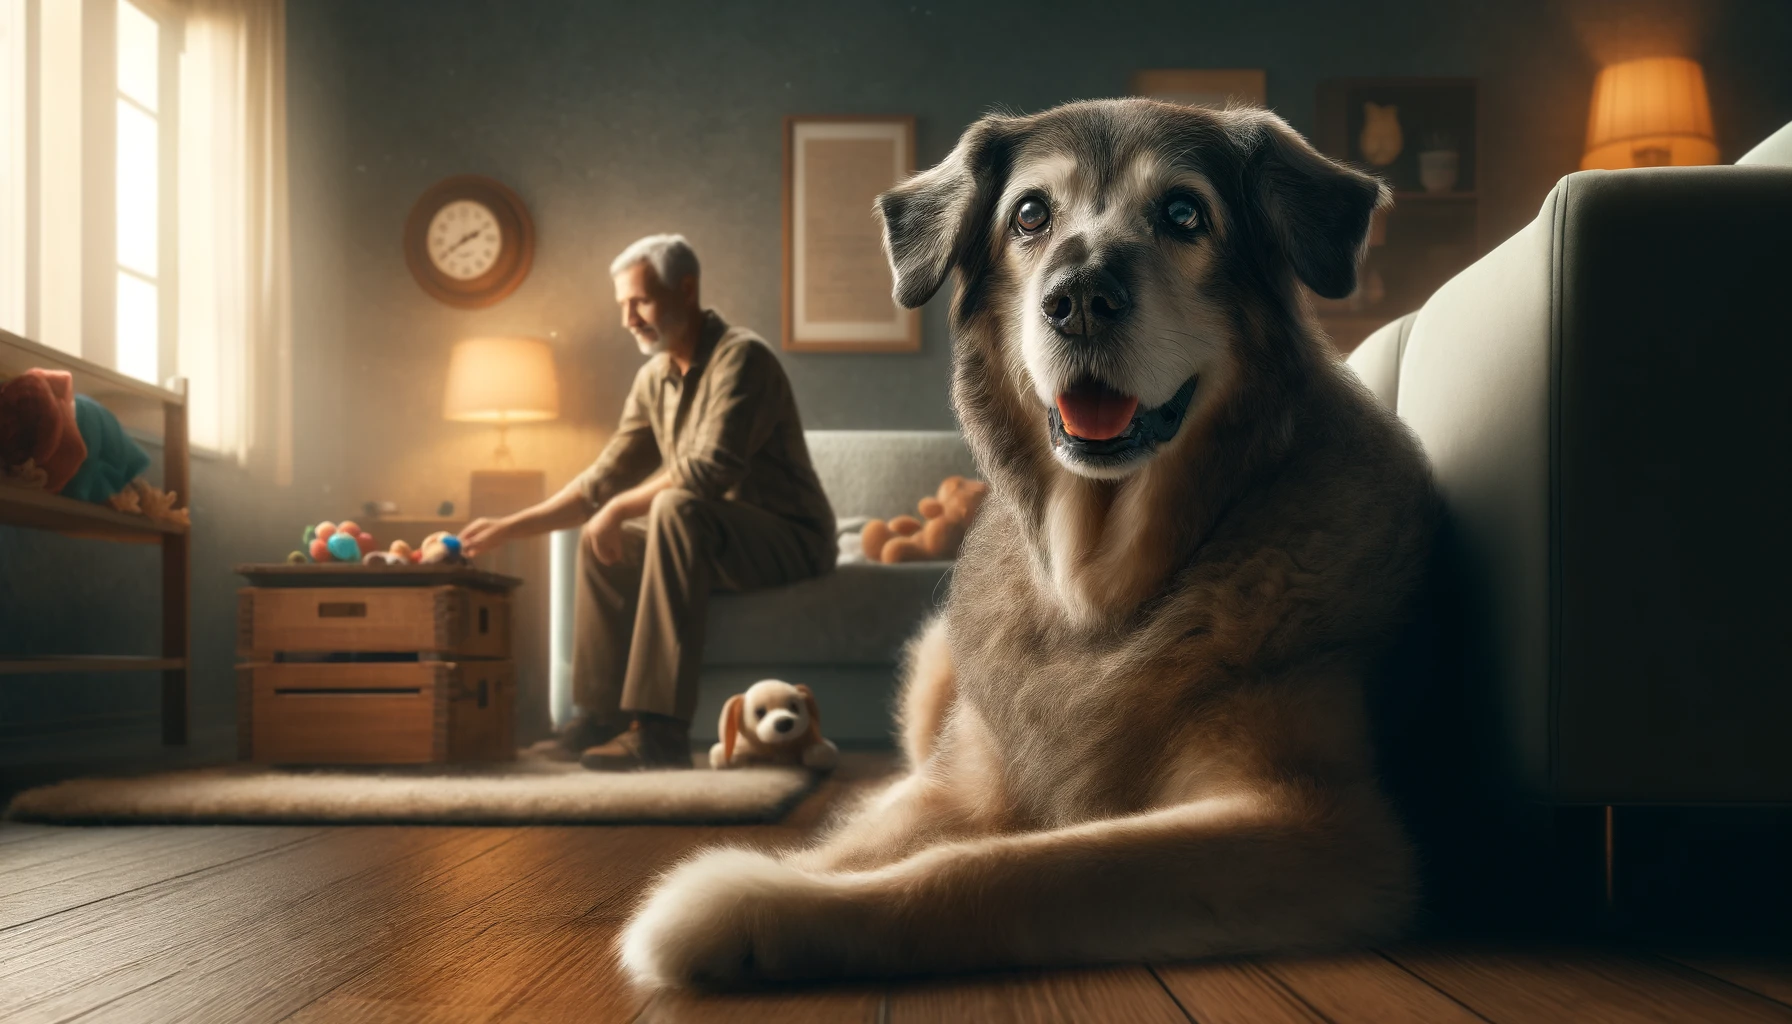 The Image Depicts A Tranquil Scene Emphasizing The Theme Of 'caring For Older Dogs An Experienced Dog Dad.' In The Foreground, An Older, Wise Looking